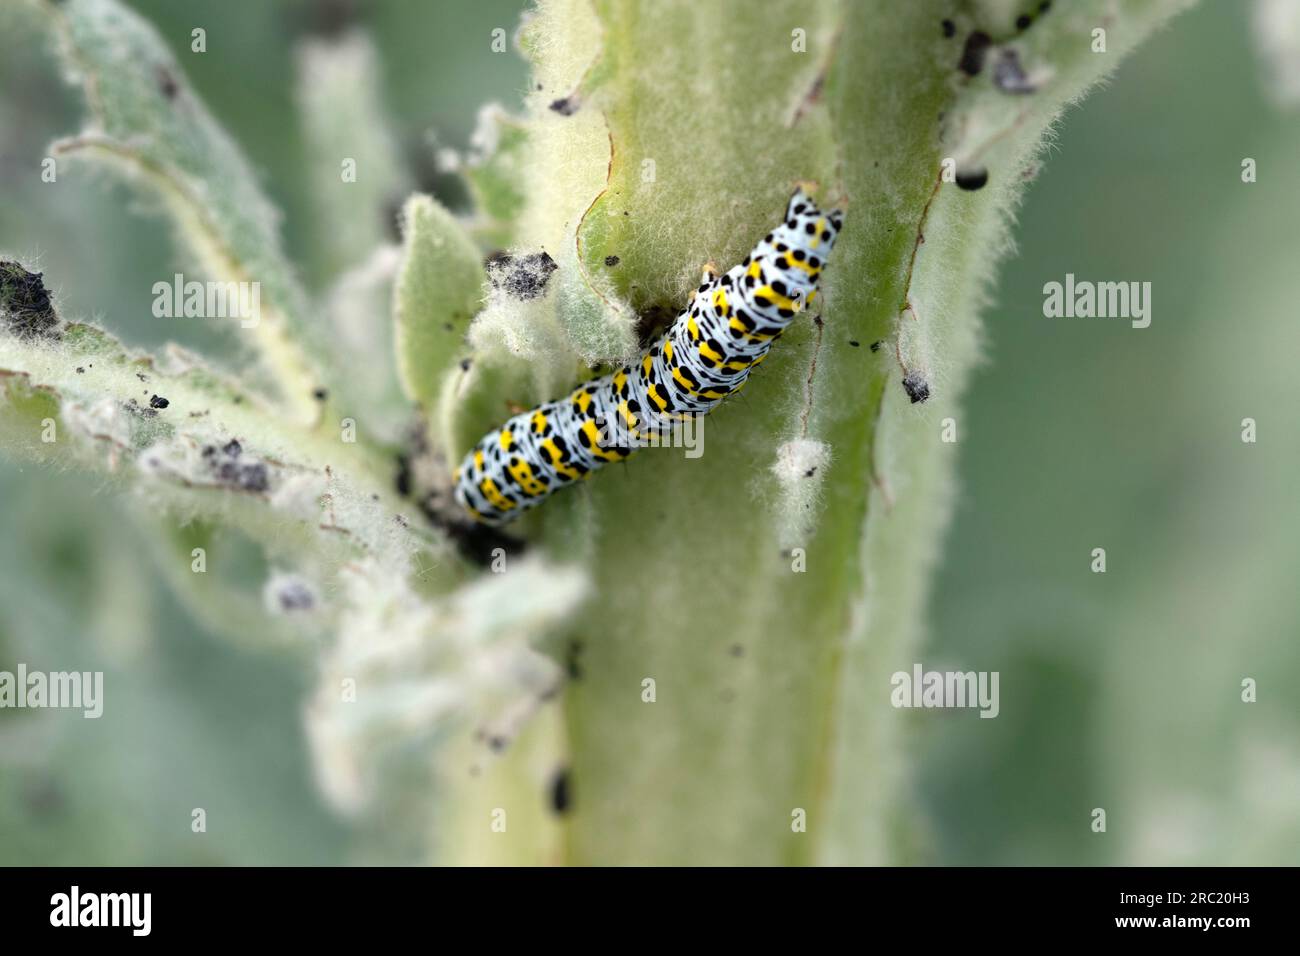 Close up macro image of mullein caterpillar on a common mullein plant. Cucullia verbasci Stock Photo